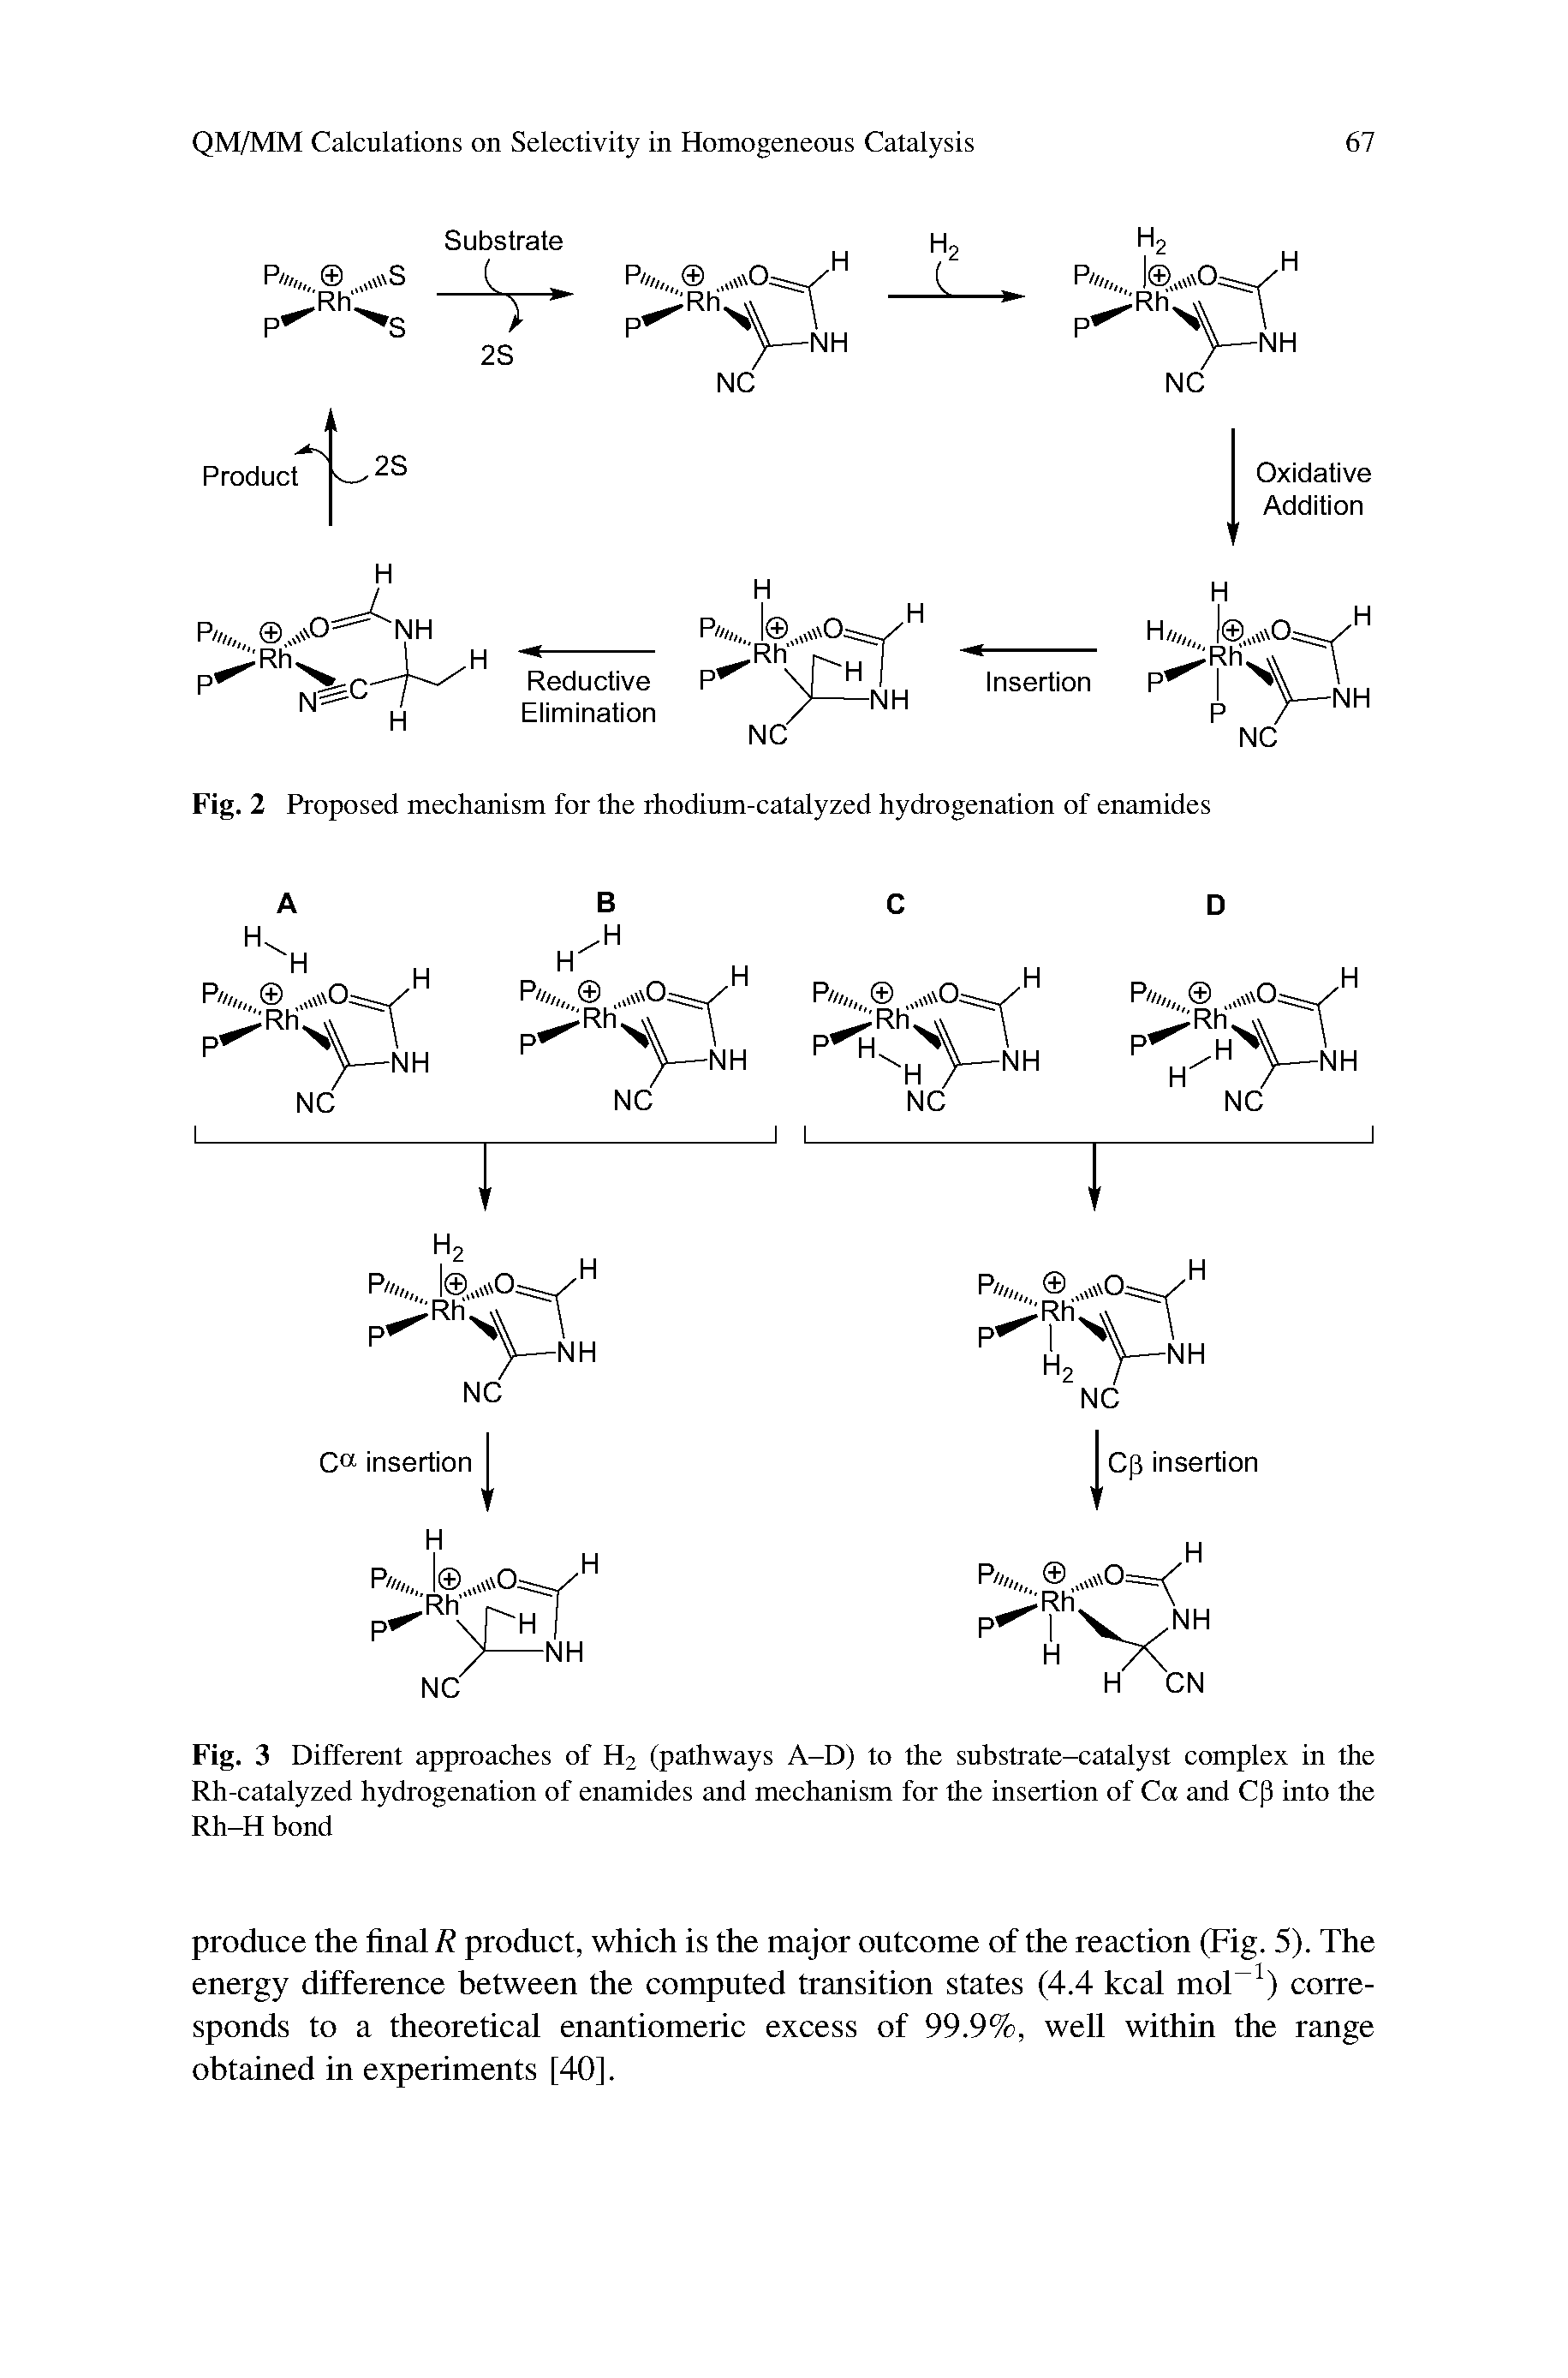 Fig. 2 Proposed mechanism for the rhodium-catalyzed hydrogenation of enamides...